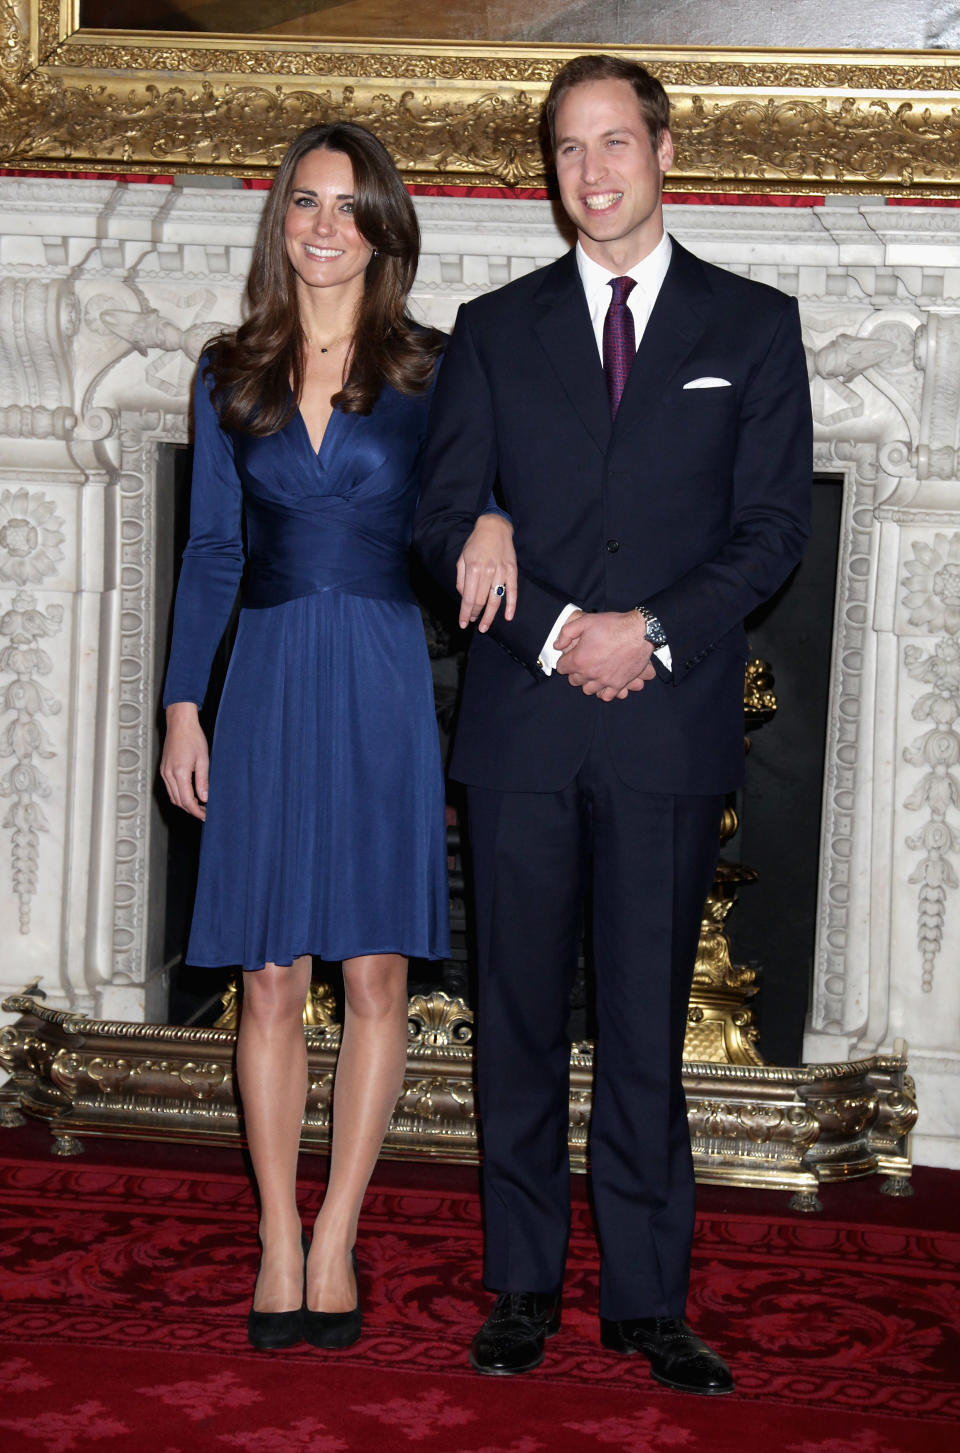 <p> Kate's outfit to announcement her formal engagement to William, a silky blue form-fitting Issa dress, matched the engagement ring William provided to Kate (originally belonging to Princess Diana). Royals had worn Issa dresses before, but after this iconic moment, the dress sold out in minutes and produced a huge waitlist. It even gave us a new trend: "the little blue dress," and the same style is still a popular choice today. It was an impressive start and a sign of things to come. </p>